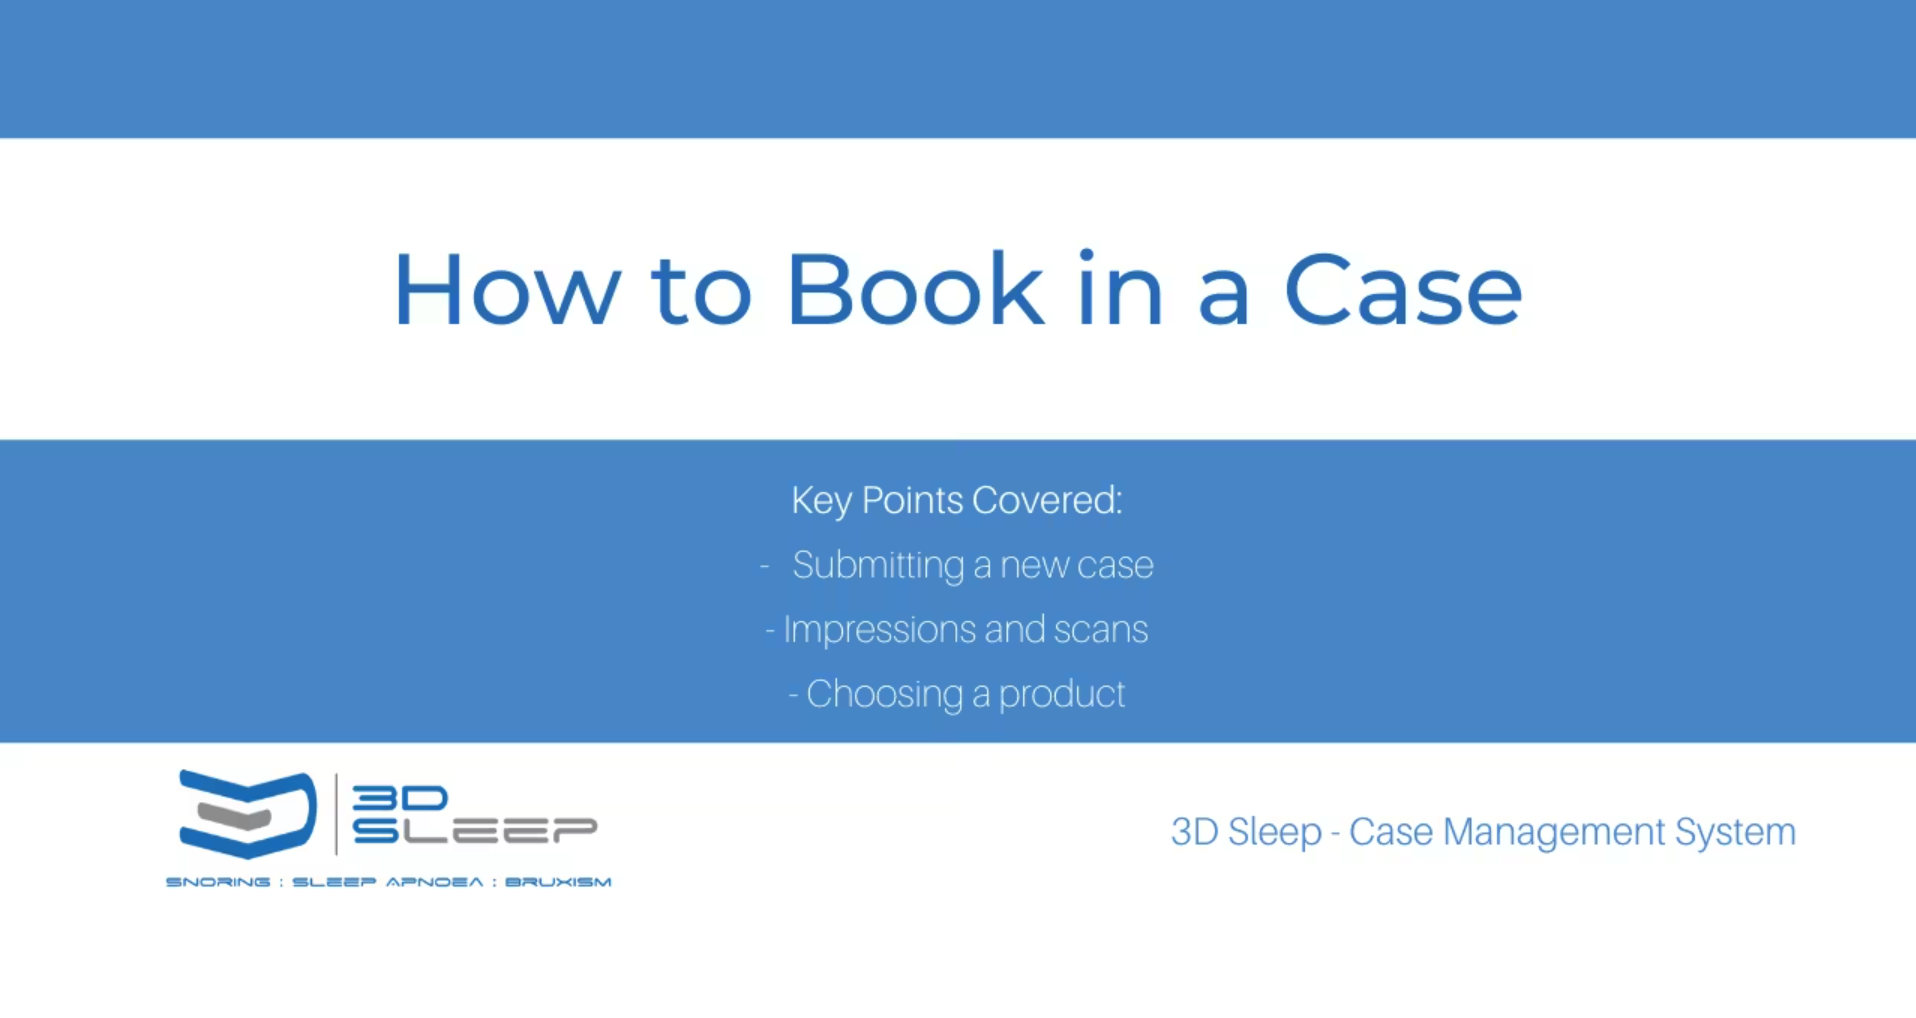 3. How to Book in a Case (Laboratory)